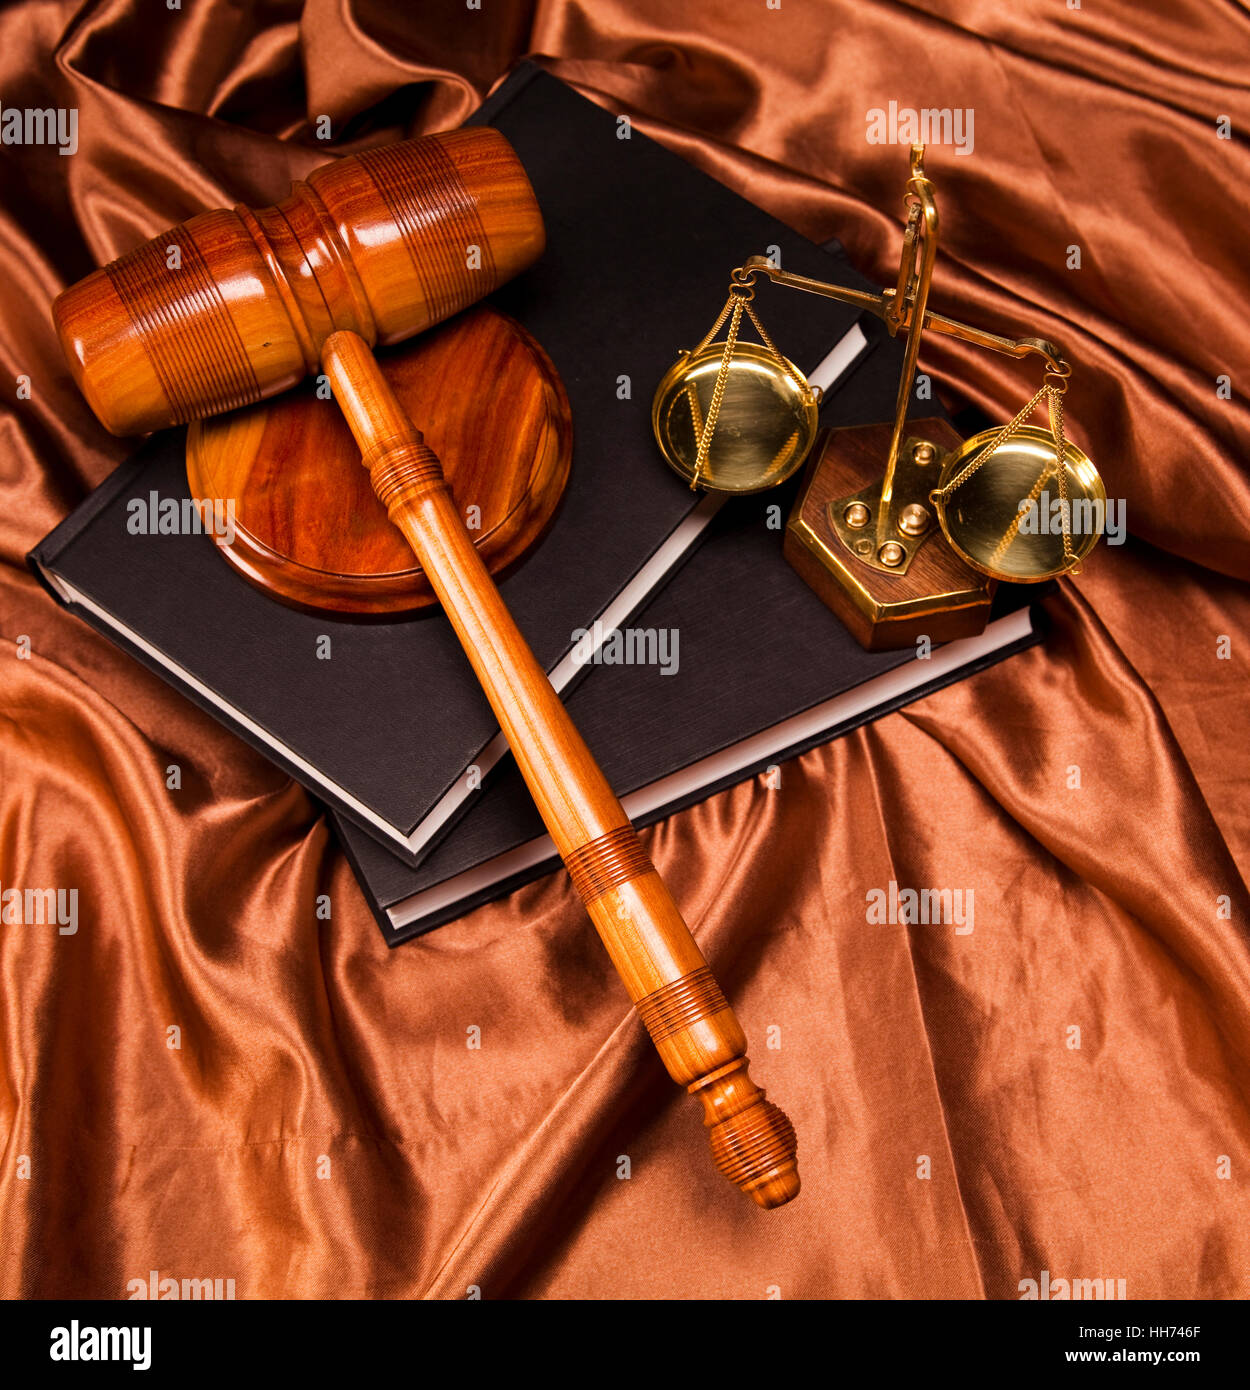 wood, law, justice, lawyer, judge, legal, gavel, hammer, order, object, Stock Photo